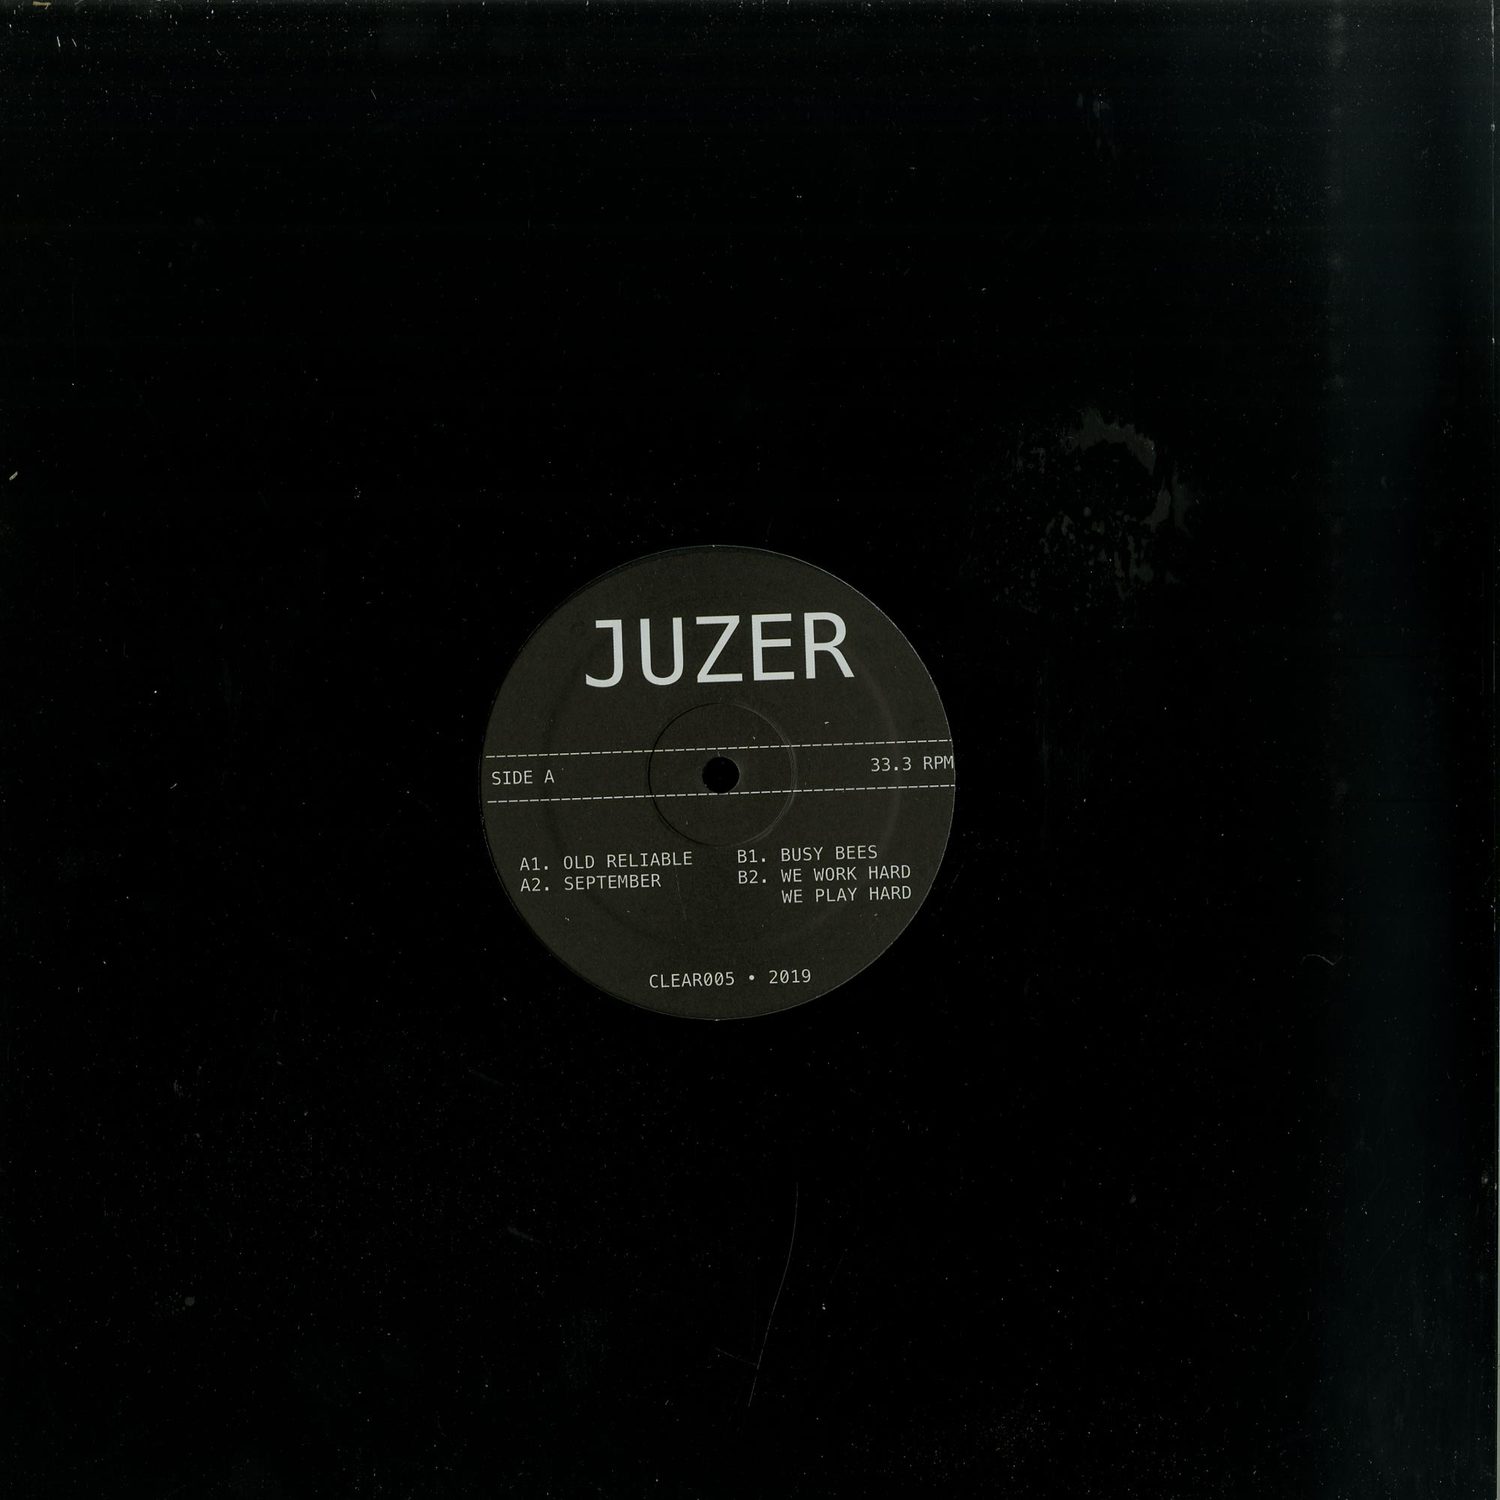 Juzer - OLD RELIABLE